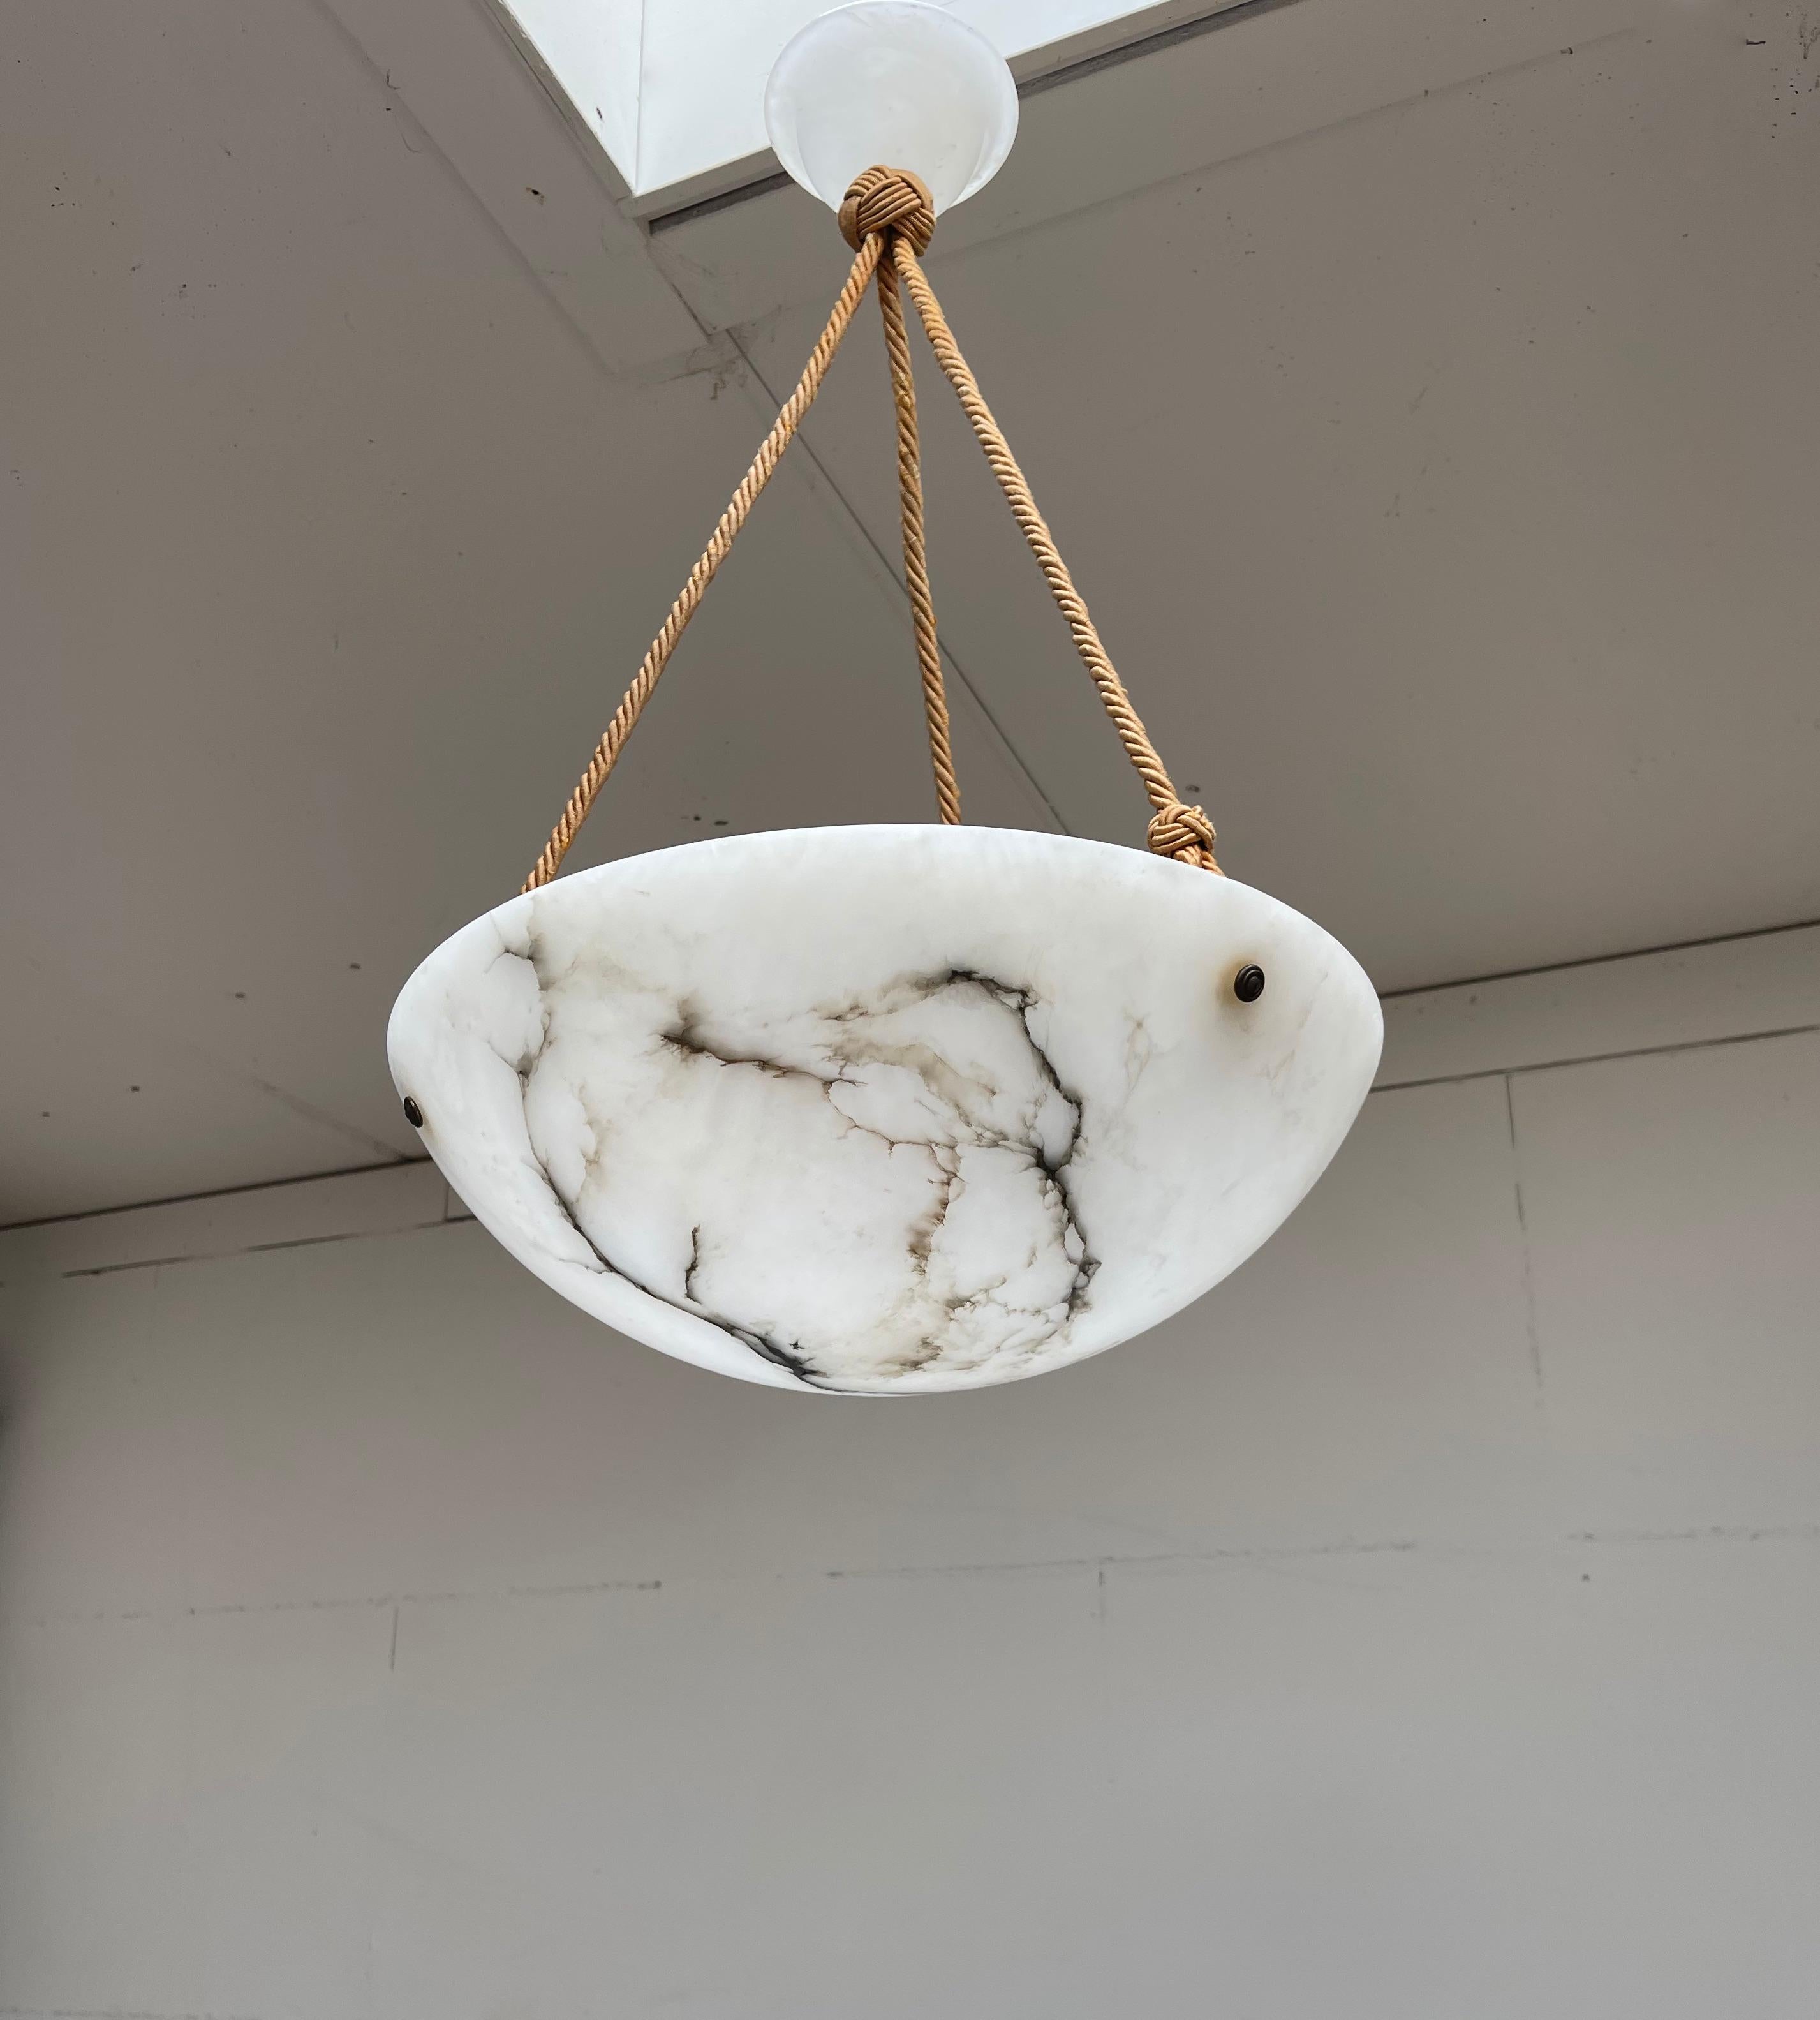 Good size black and white alabaster chandelier with original rope and alabaster canopy.

This superb condition Art Deco pendant is another one of our recent great finds. Every piece, from the alabaster canopy down to the excellent shape shade is